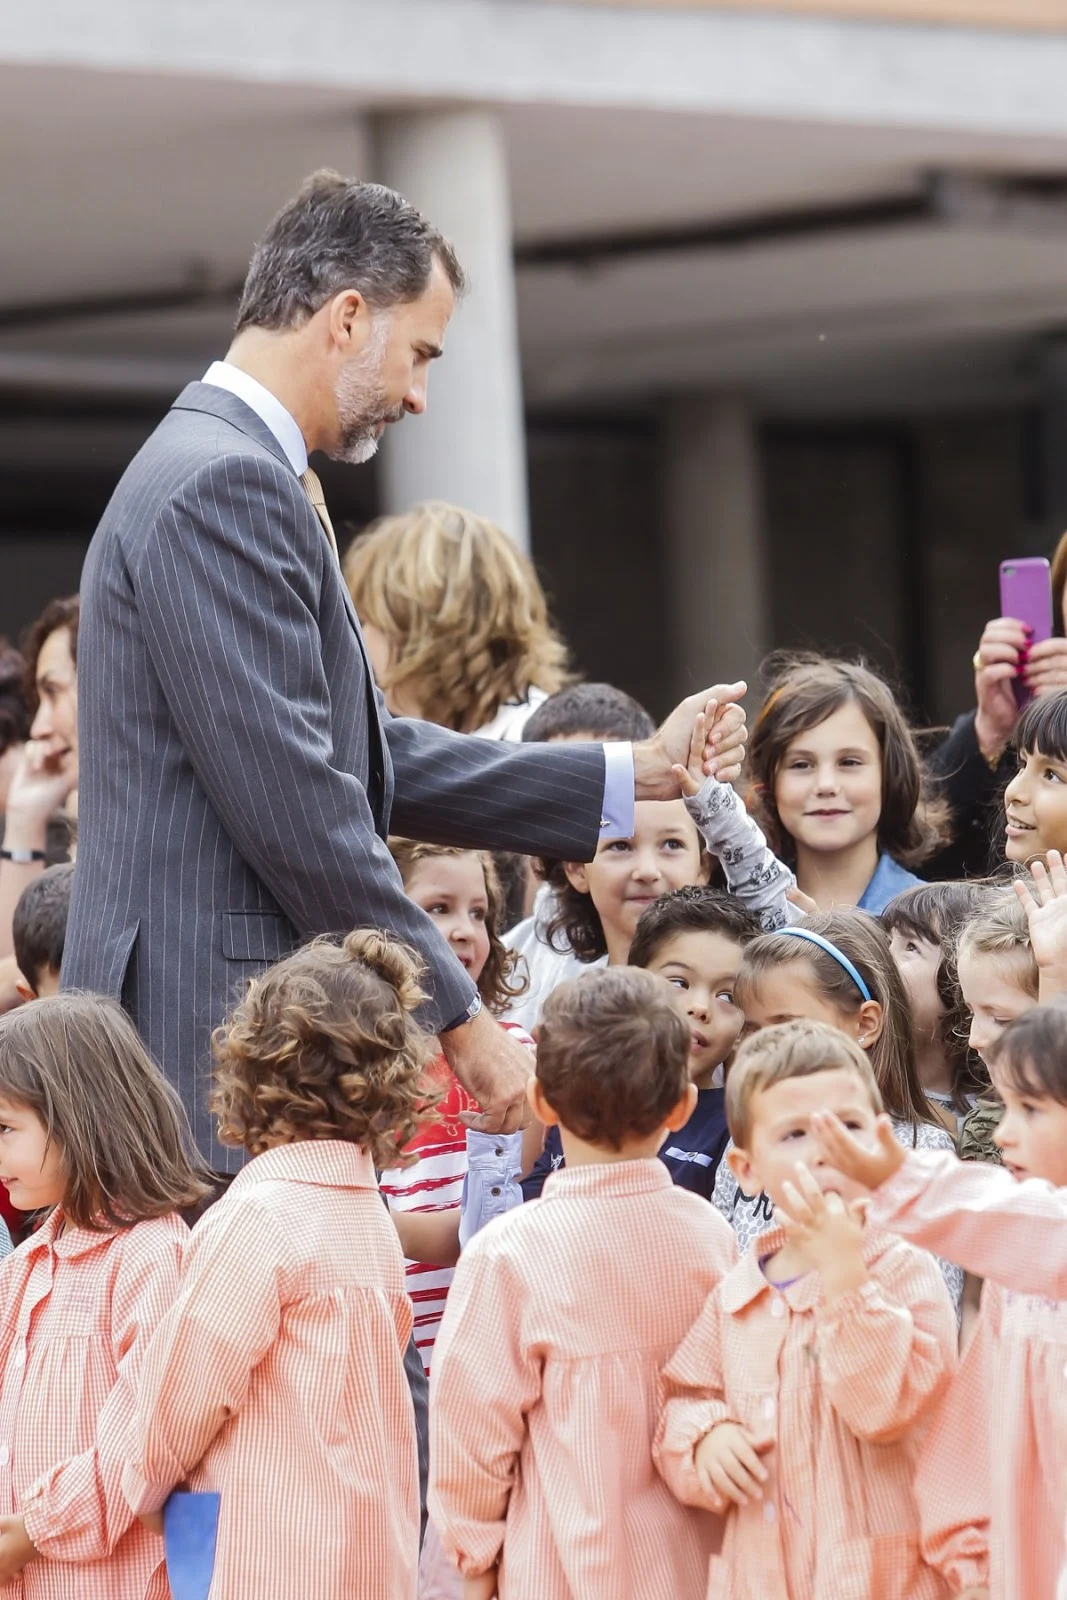 Queen Letizia in particular received a warm and adorable welcome by a girl, who threw her arms around the Queen’s legs.